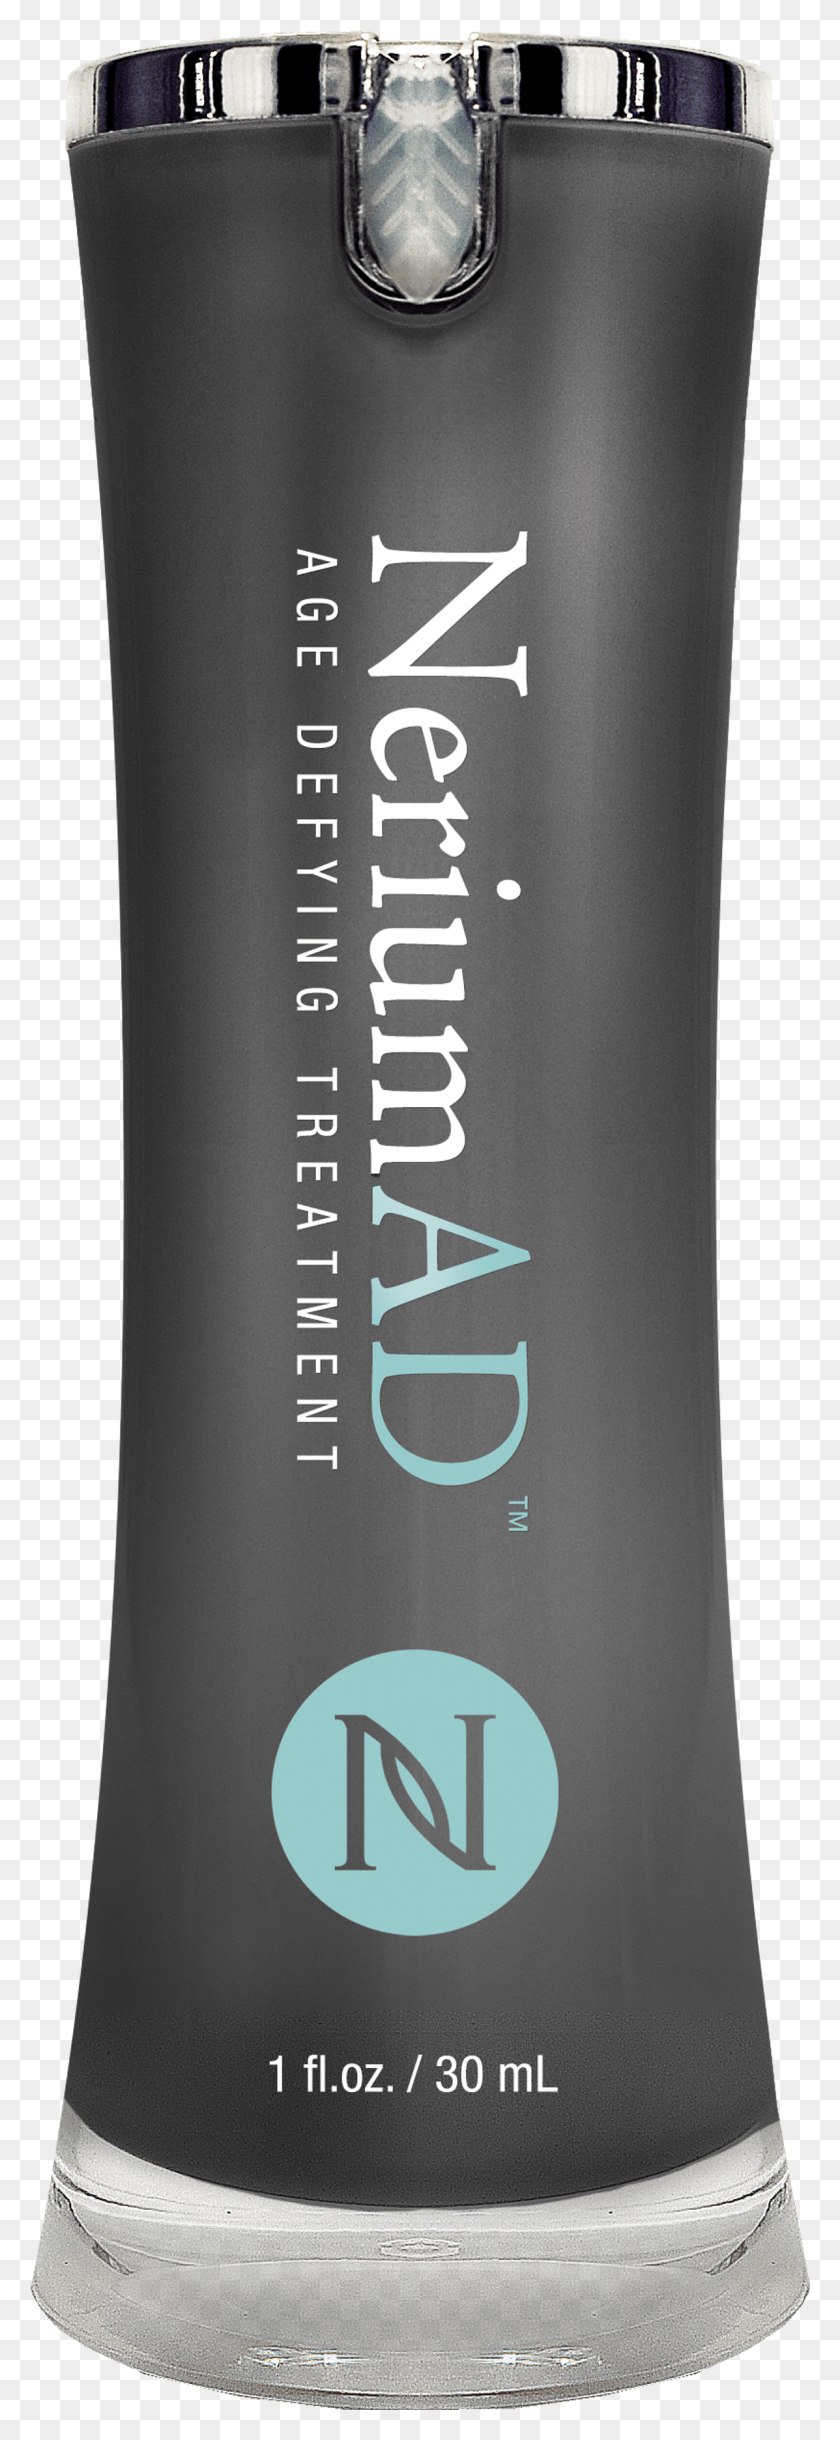 1197x3653 In 2011 A New Skincare Product Came On The Market Nerium For Acne HD PNG Download